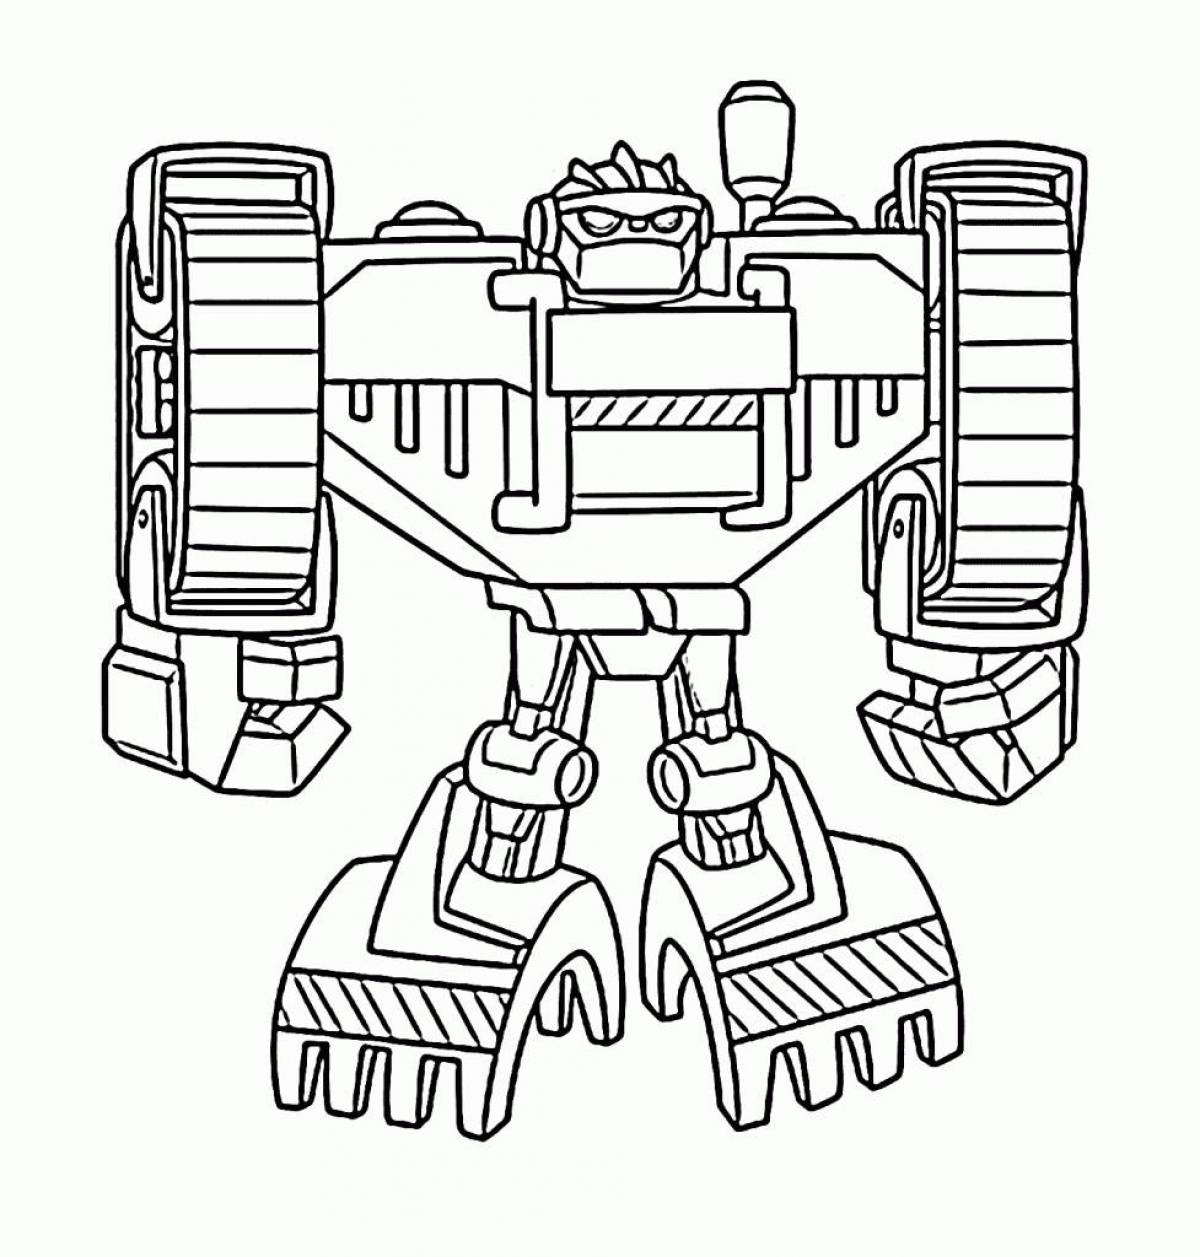 Joyful transformers coloring pages for kids